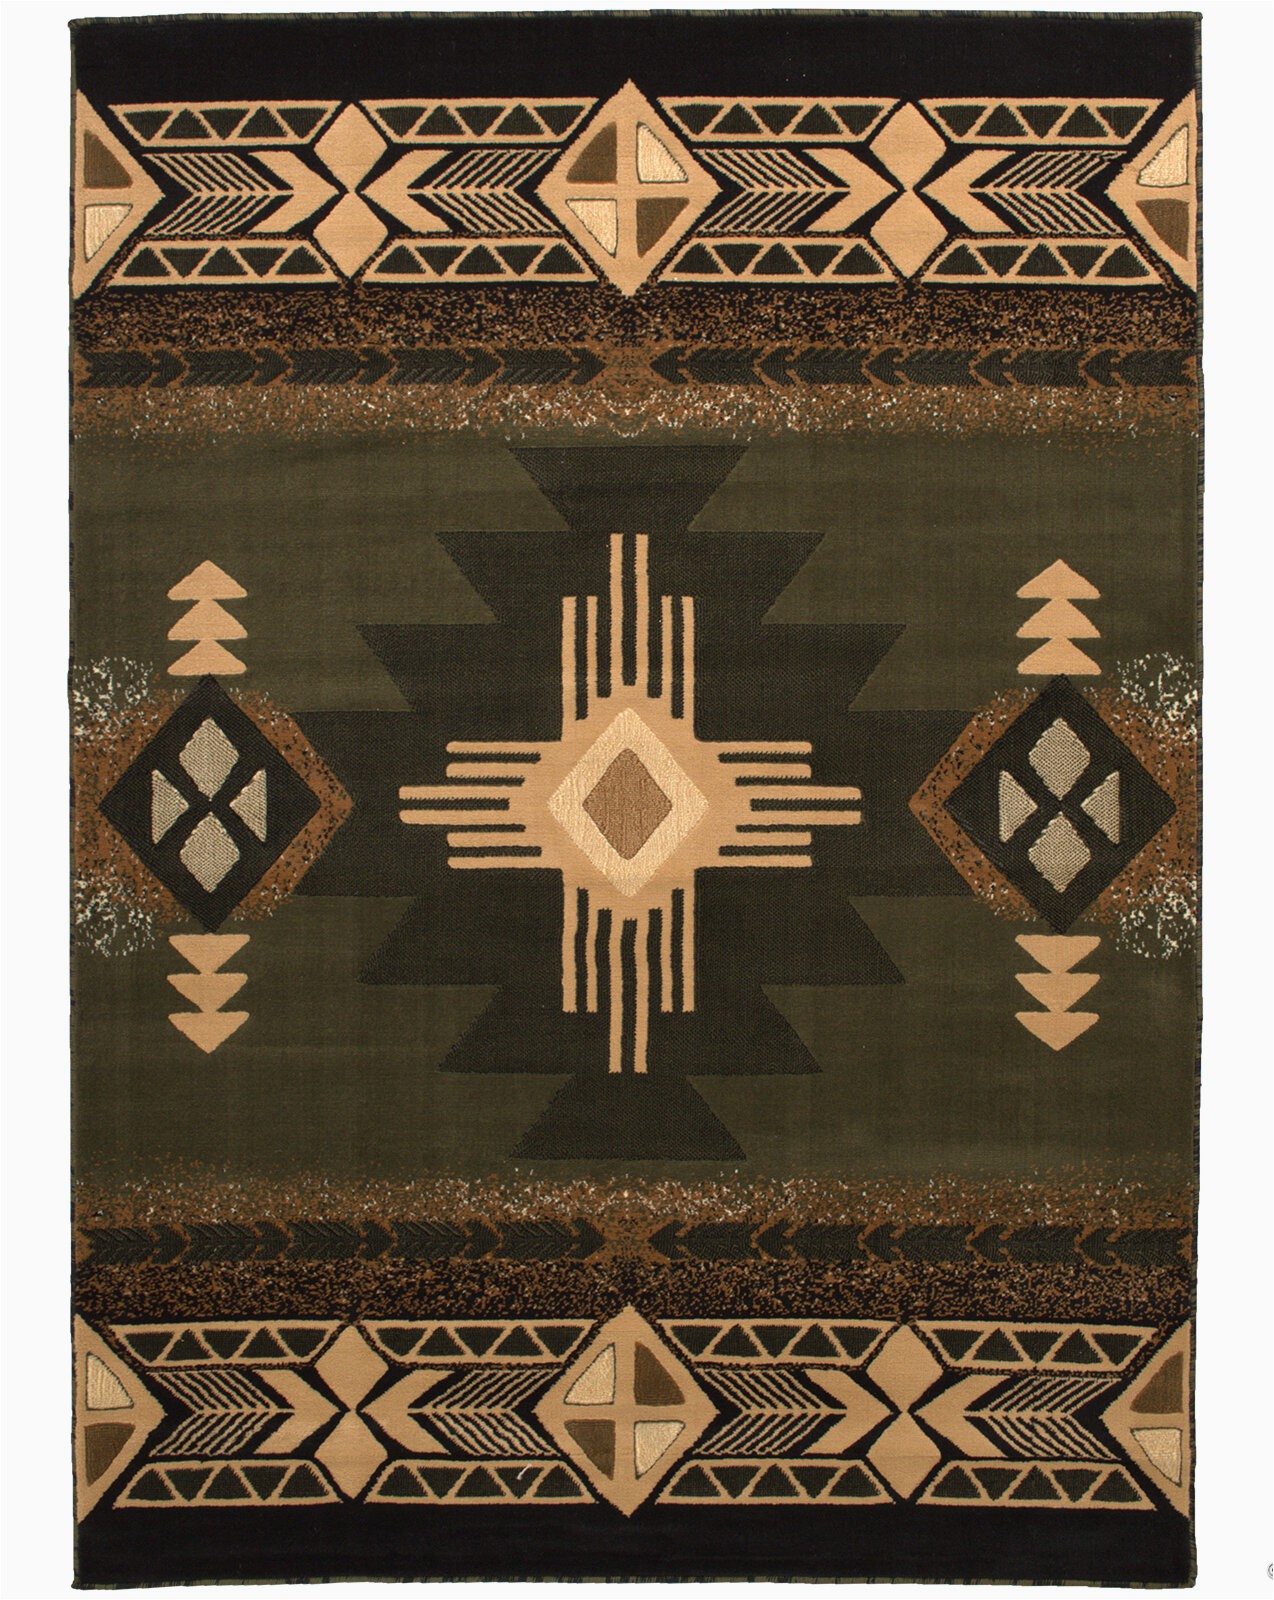 Native American Inspired area Rugs Allport High Quality Woven Native American Runner Double Shot Drop Stitch Carving Sage Green area Rug